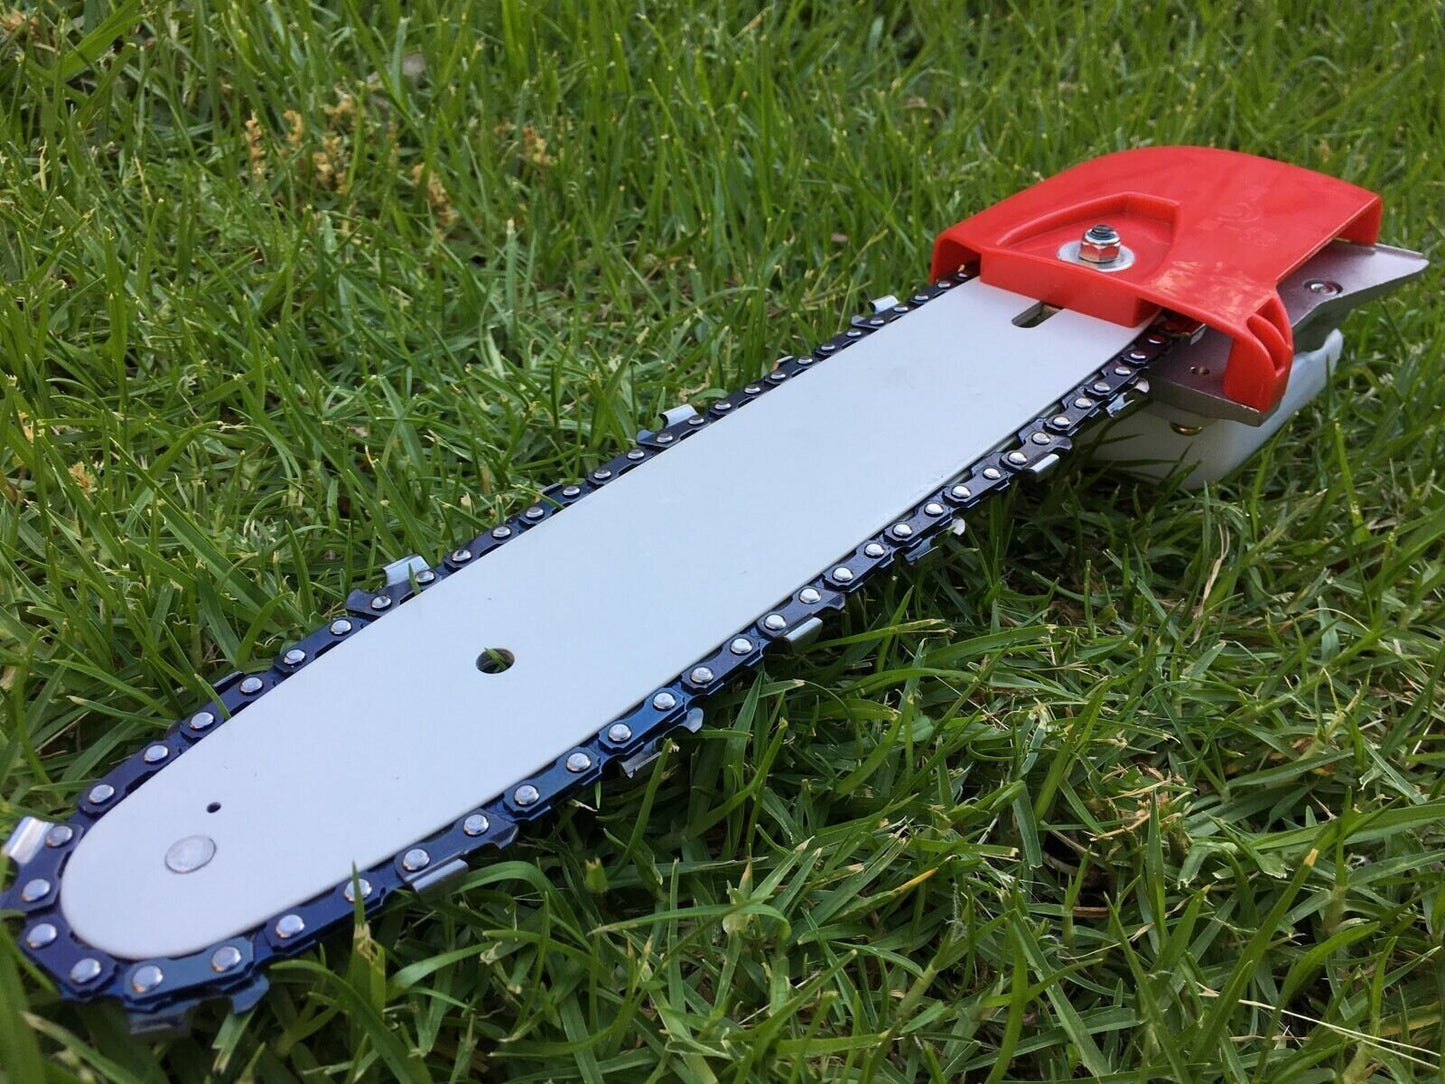 Chainsaw Head 12" Bar & 2 Chain - Fit 24mm Pole w/5mm Square Shaft grass trimmer